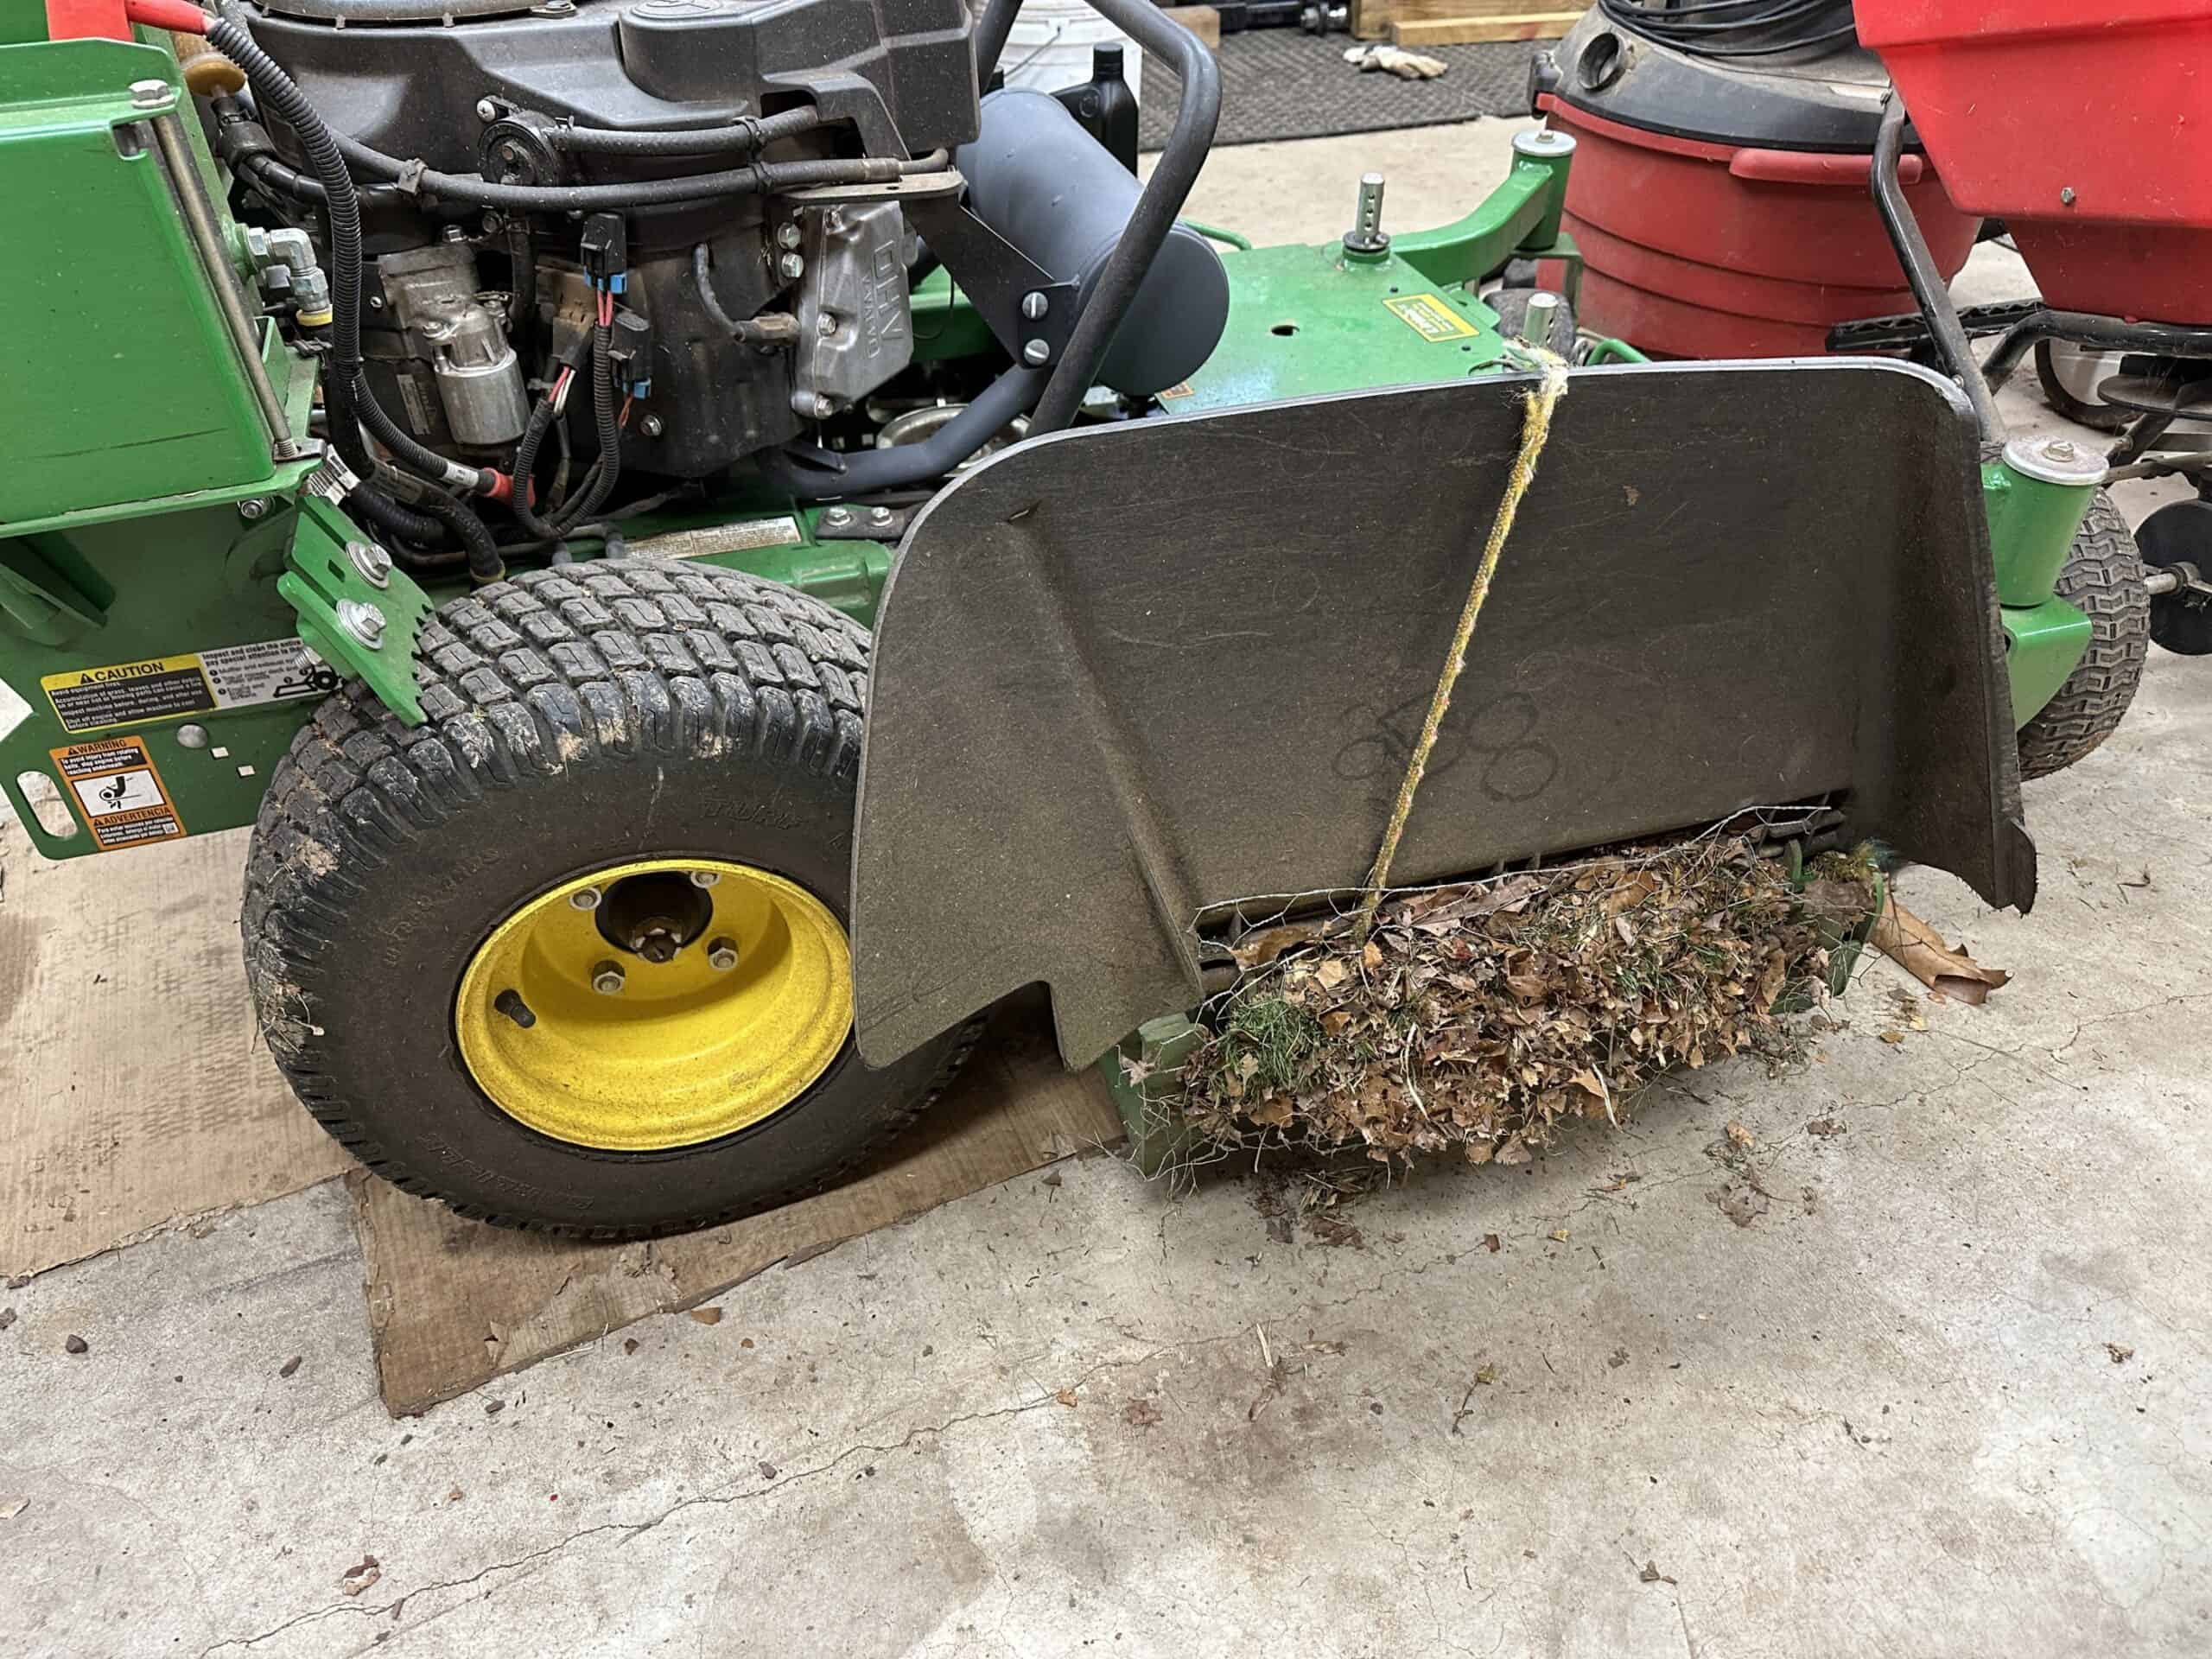 Side discharge chute of a lawnmower.